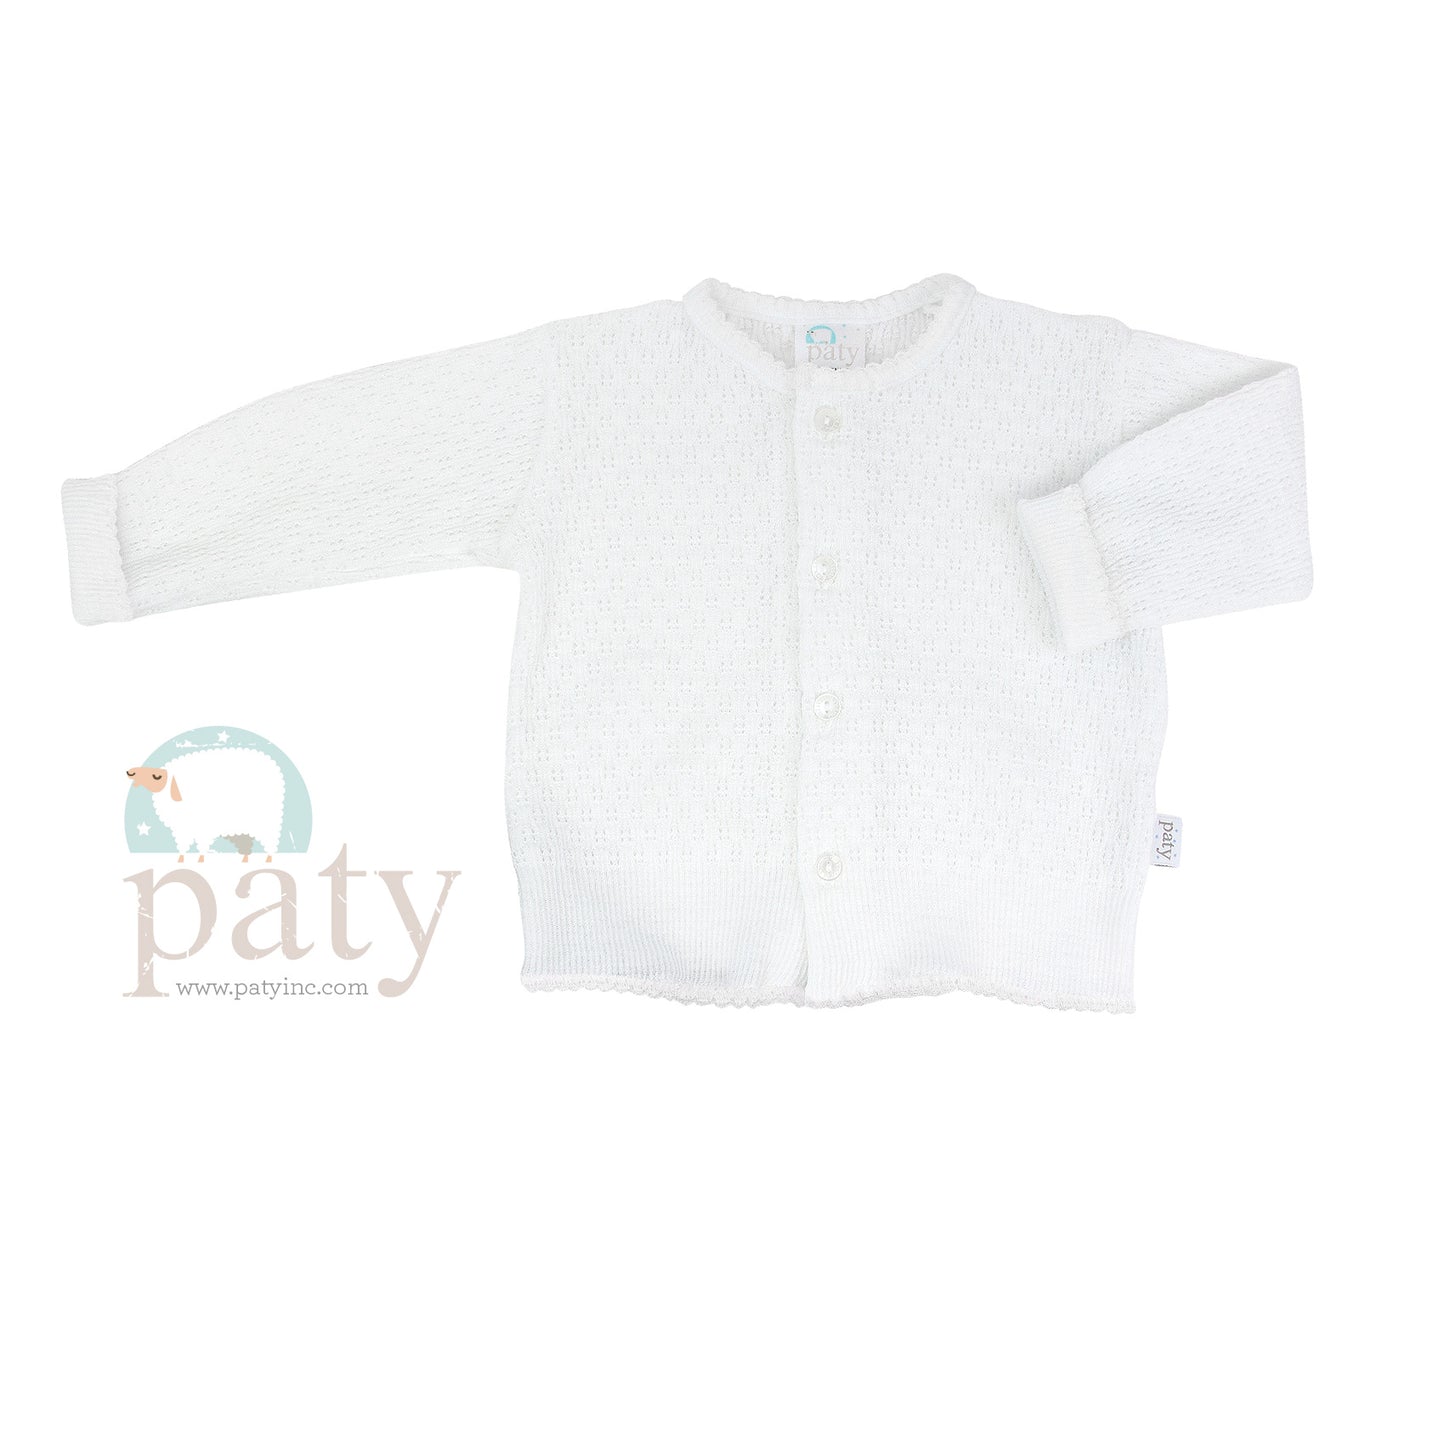 Paty Knit LS Button Up White Cardigan Sweater with White Trim